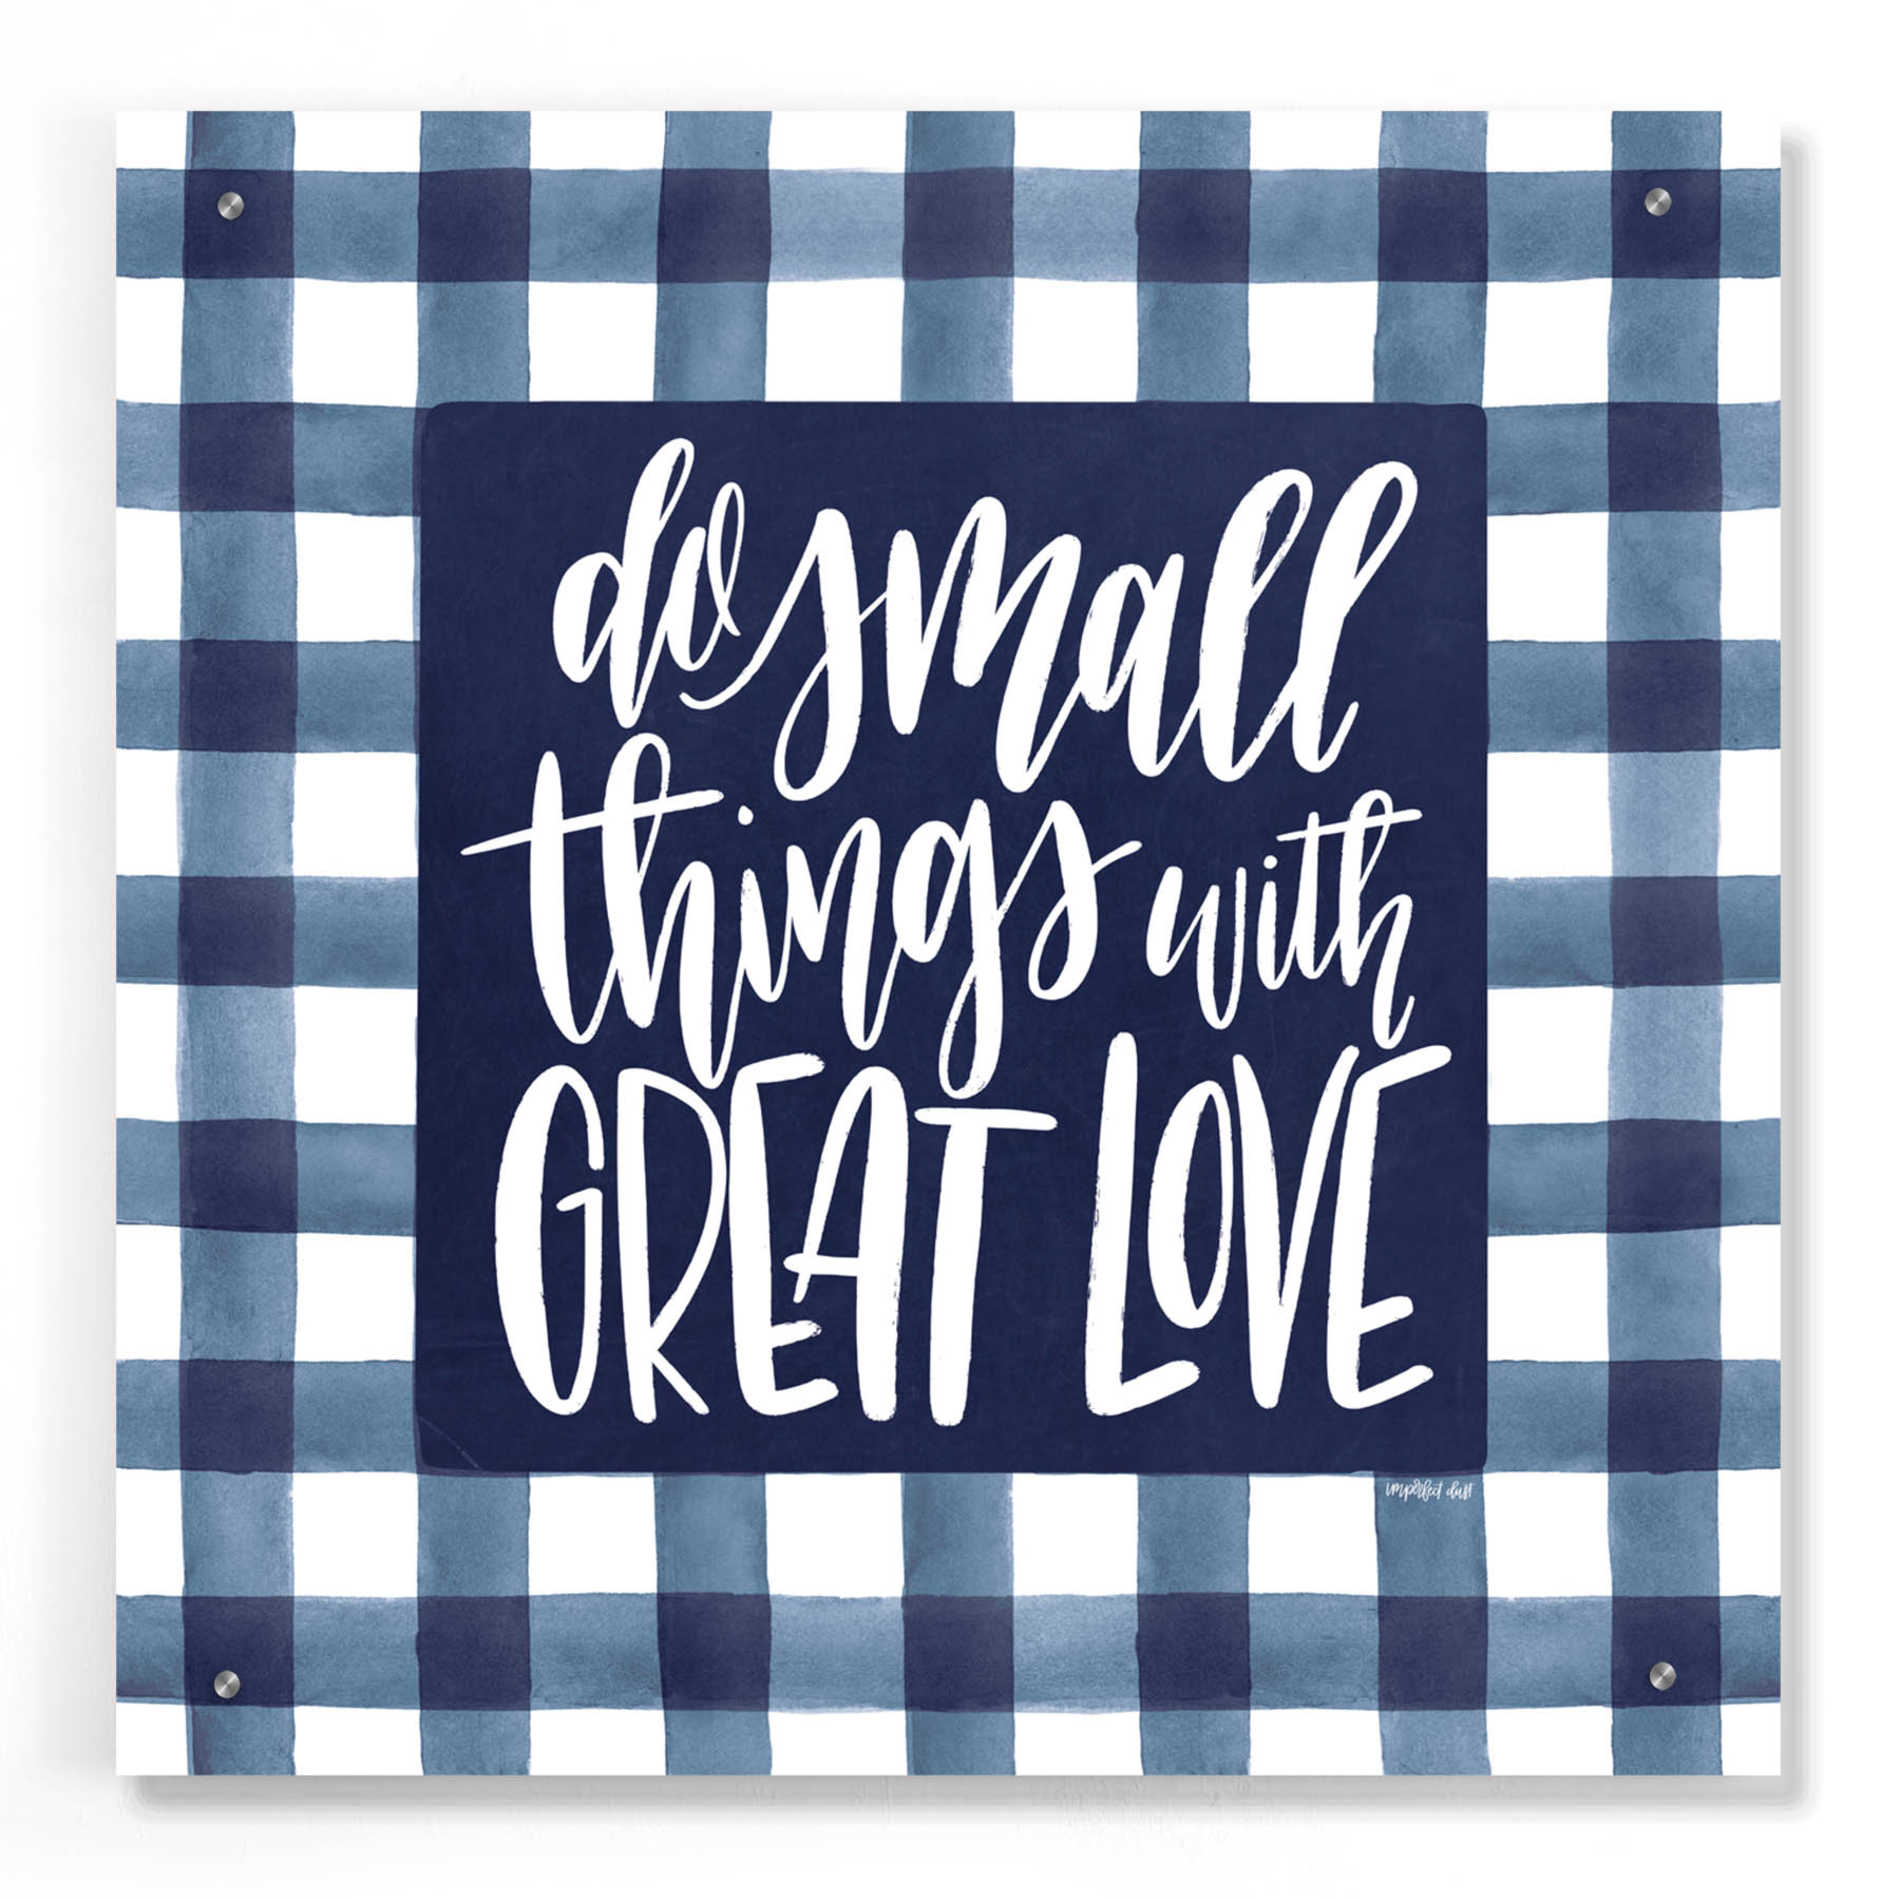 Epic Art 'Do Small Things with Great Love' by Imperfect Dust, Acrylic Glass Wall Art,24x24